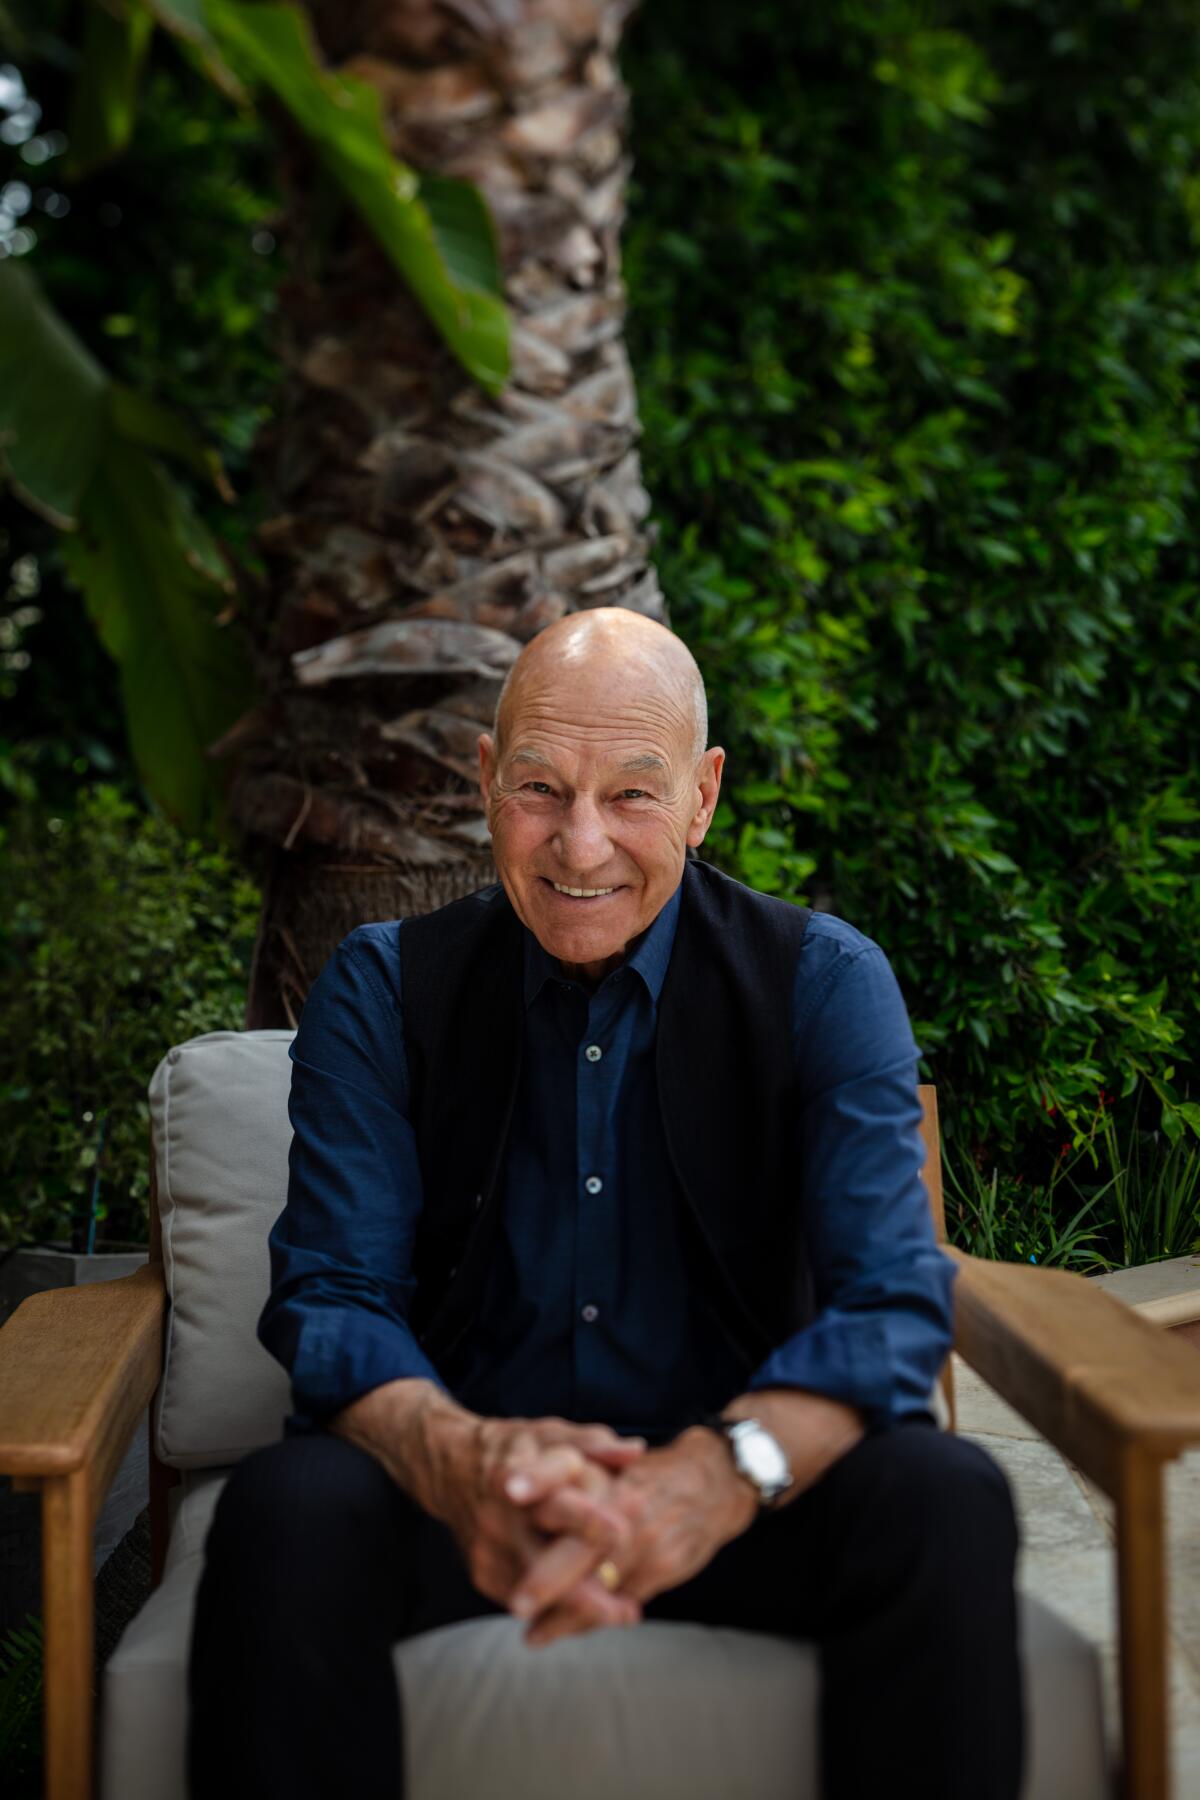 Actor, director and producer, Sir Patrick Stewart, has returned to his role as Jean-Luc Picard in "Star Trek: Picard."